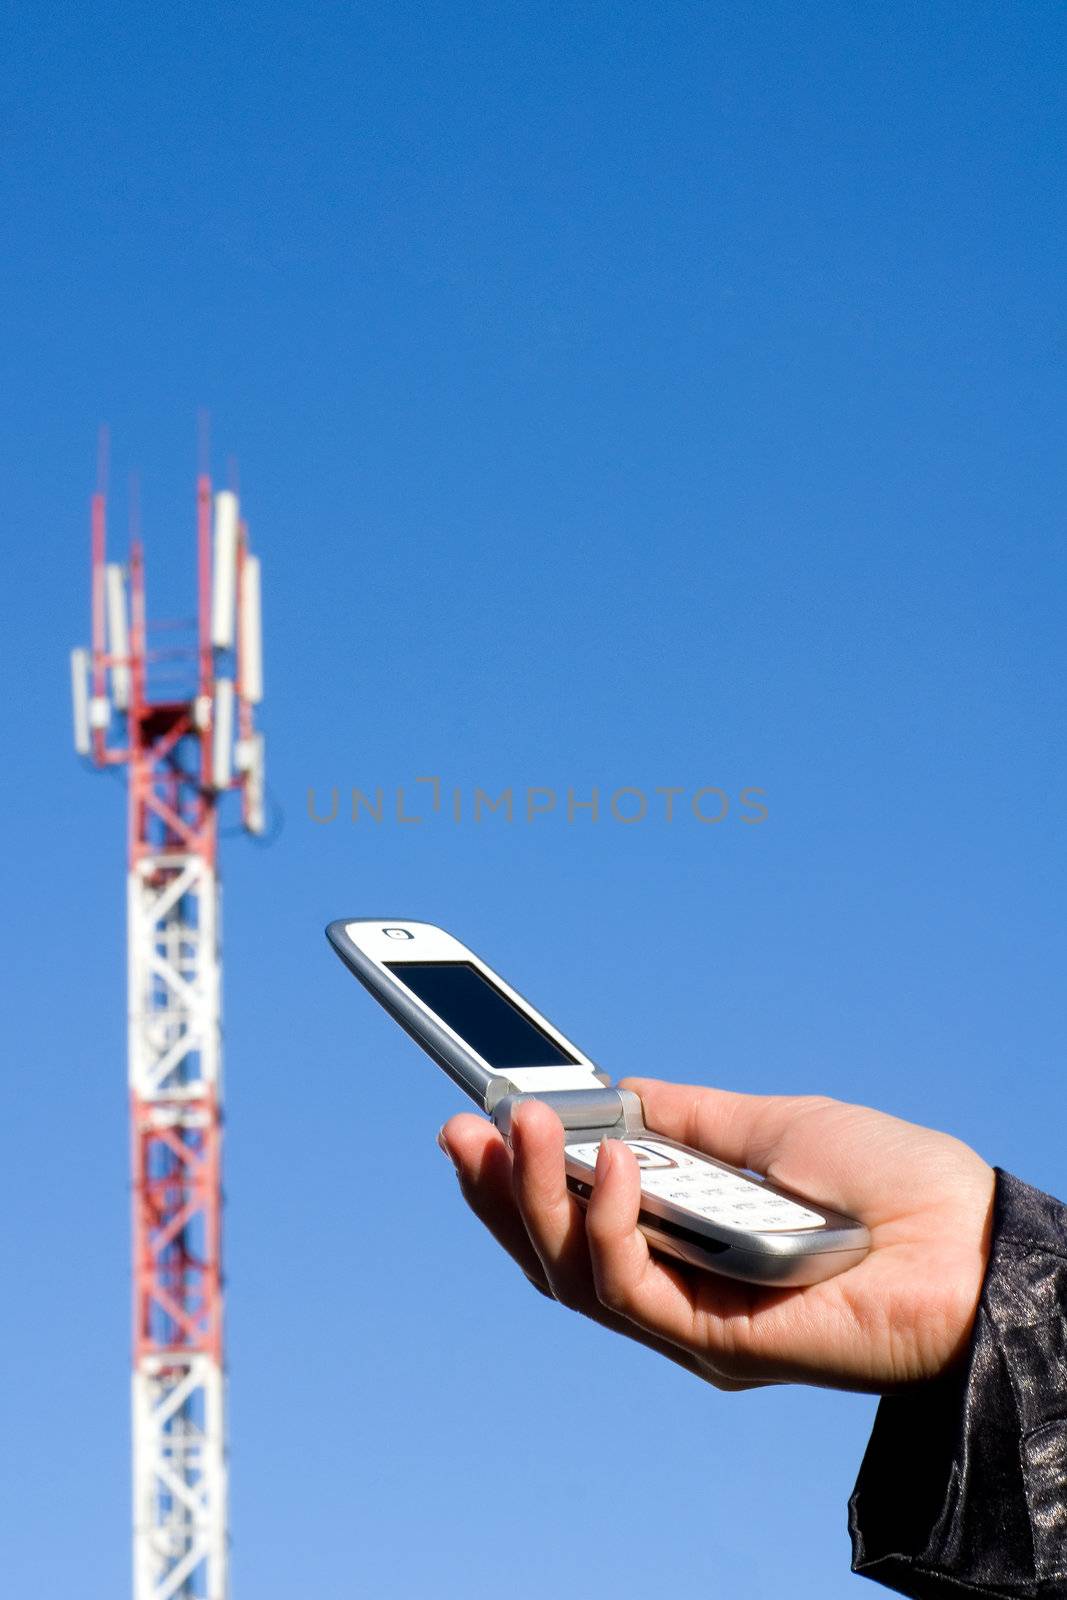 Phone and GSM station by timbrk